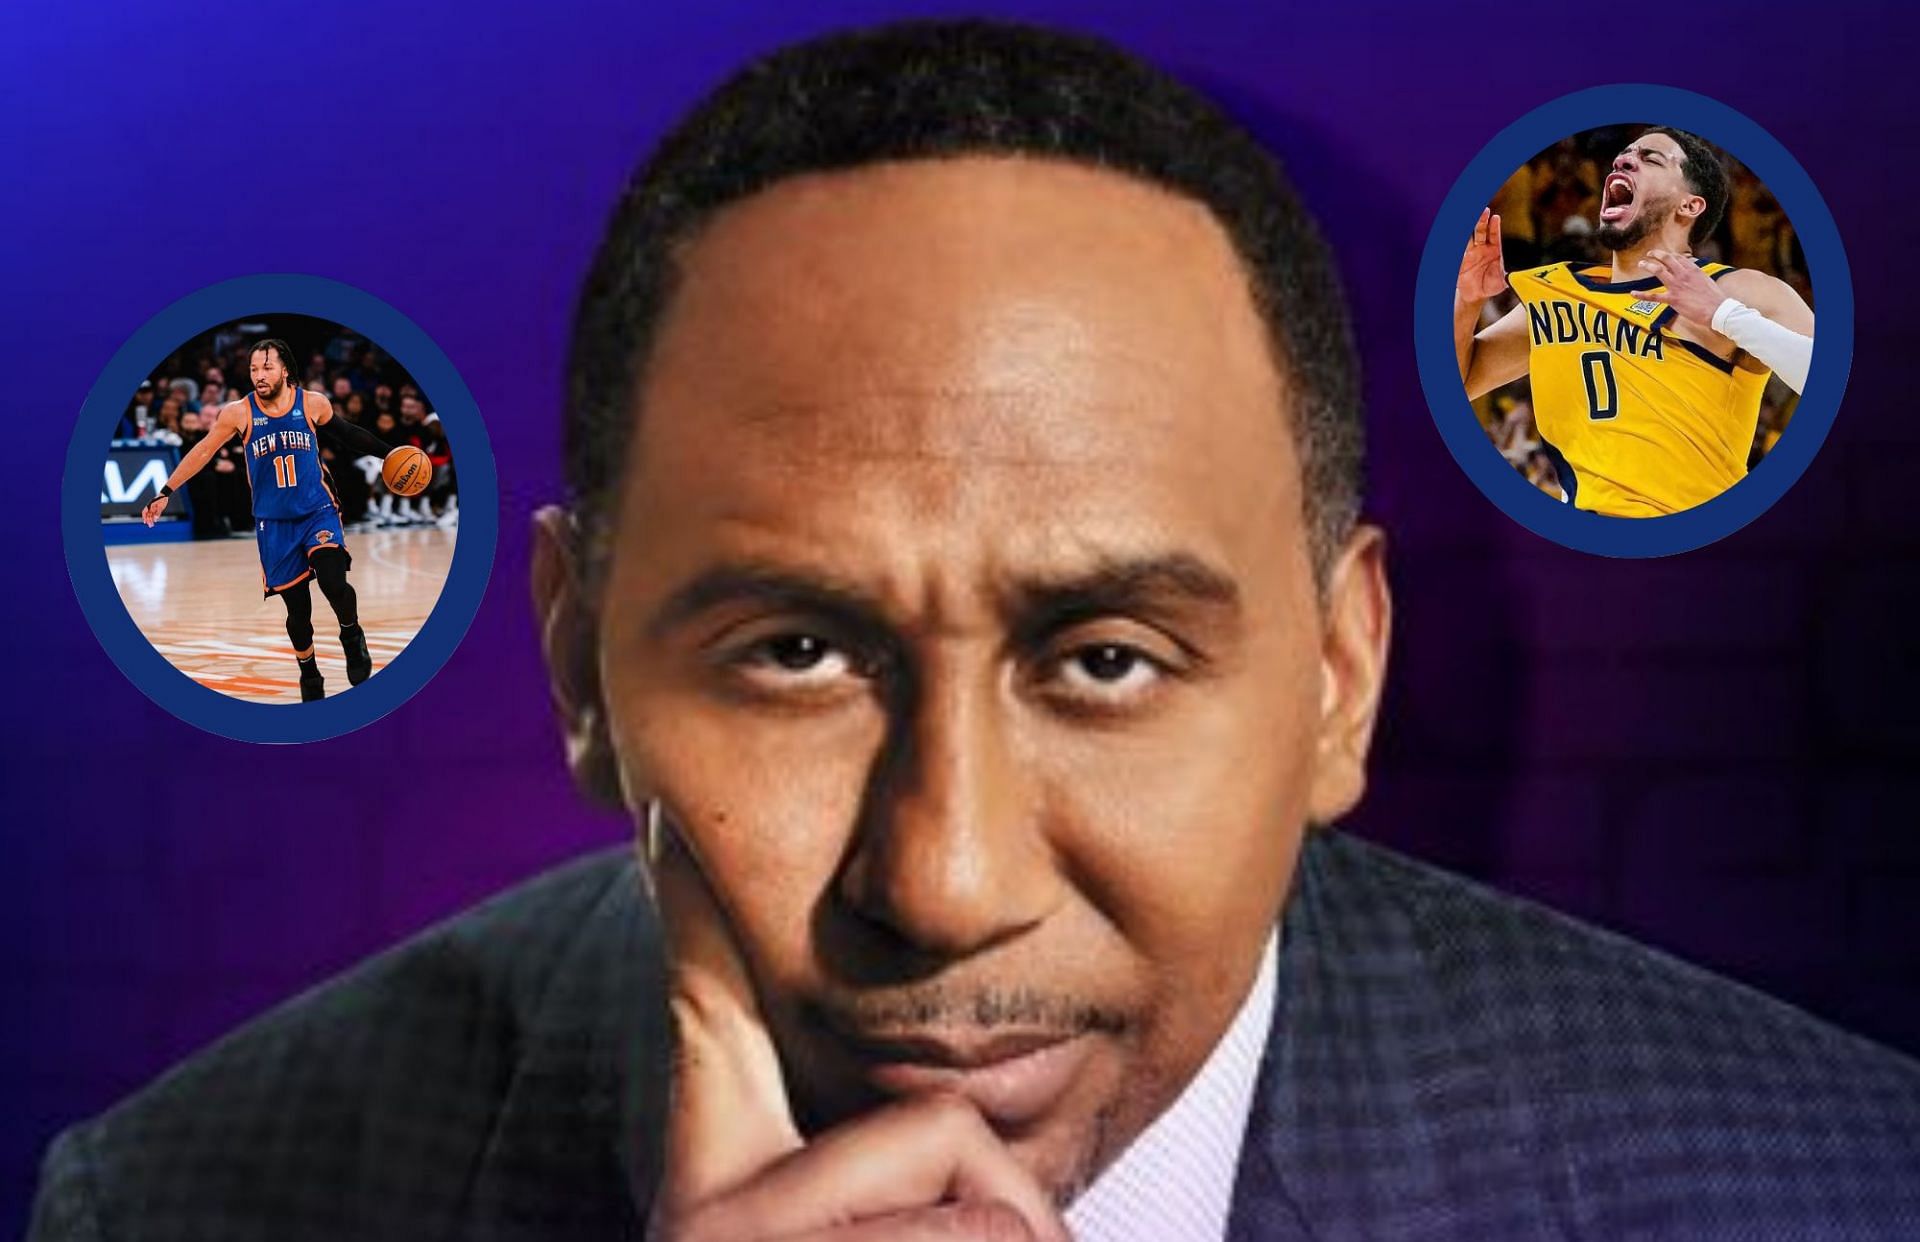 Stephen A. Smith amped over Game 7 between the New York Knicks and the Indiana Pacers